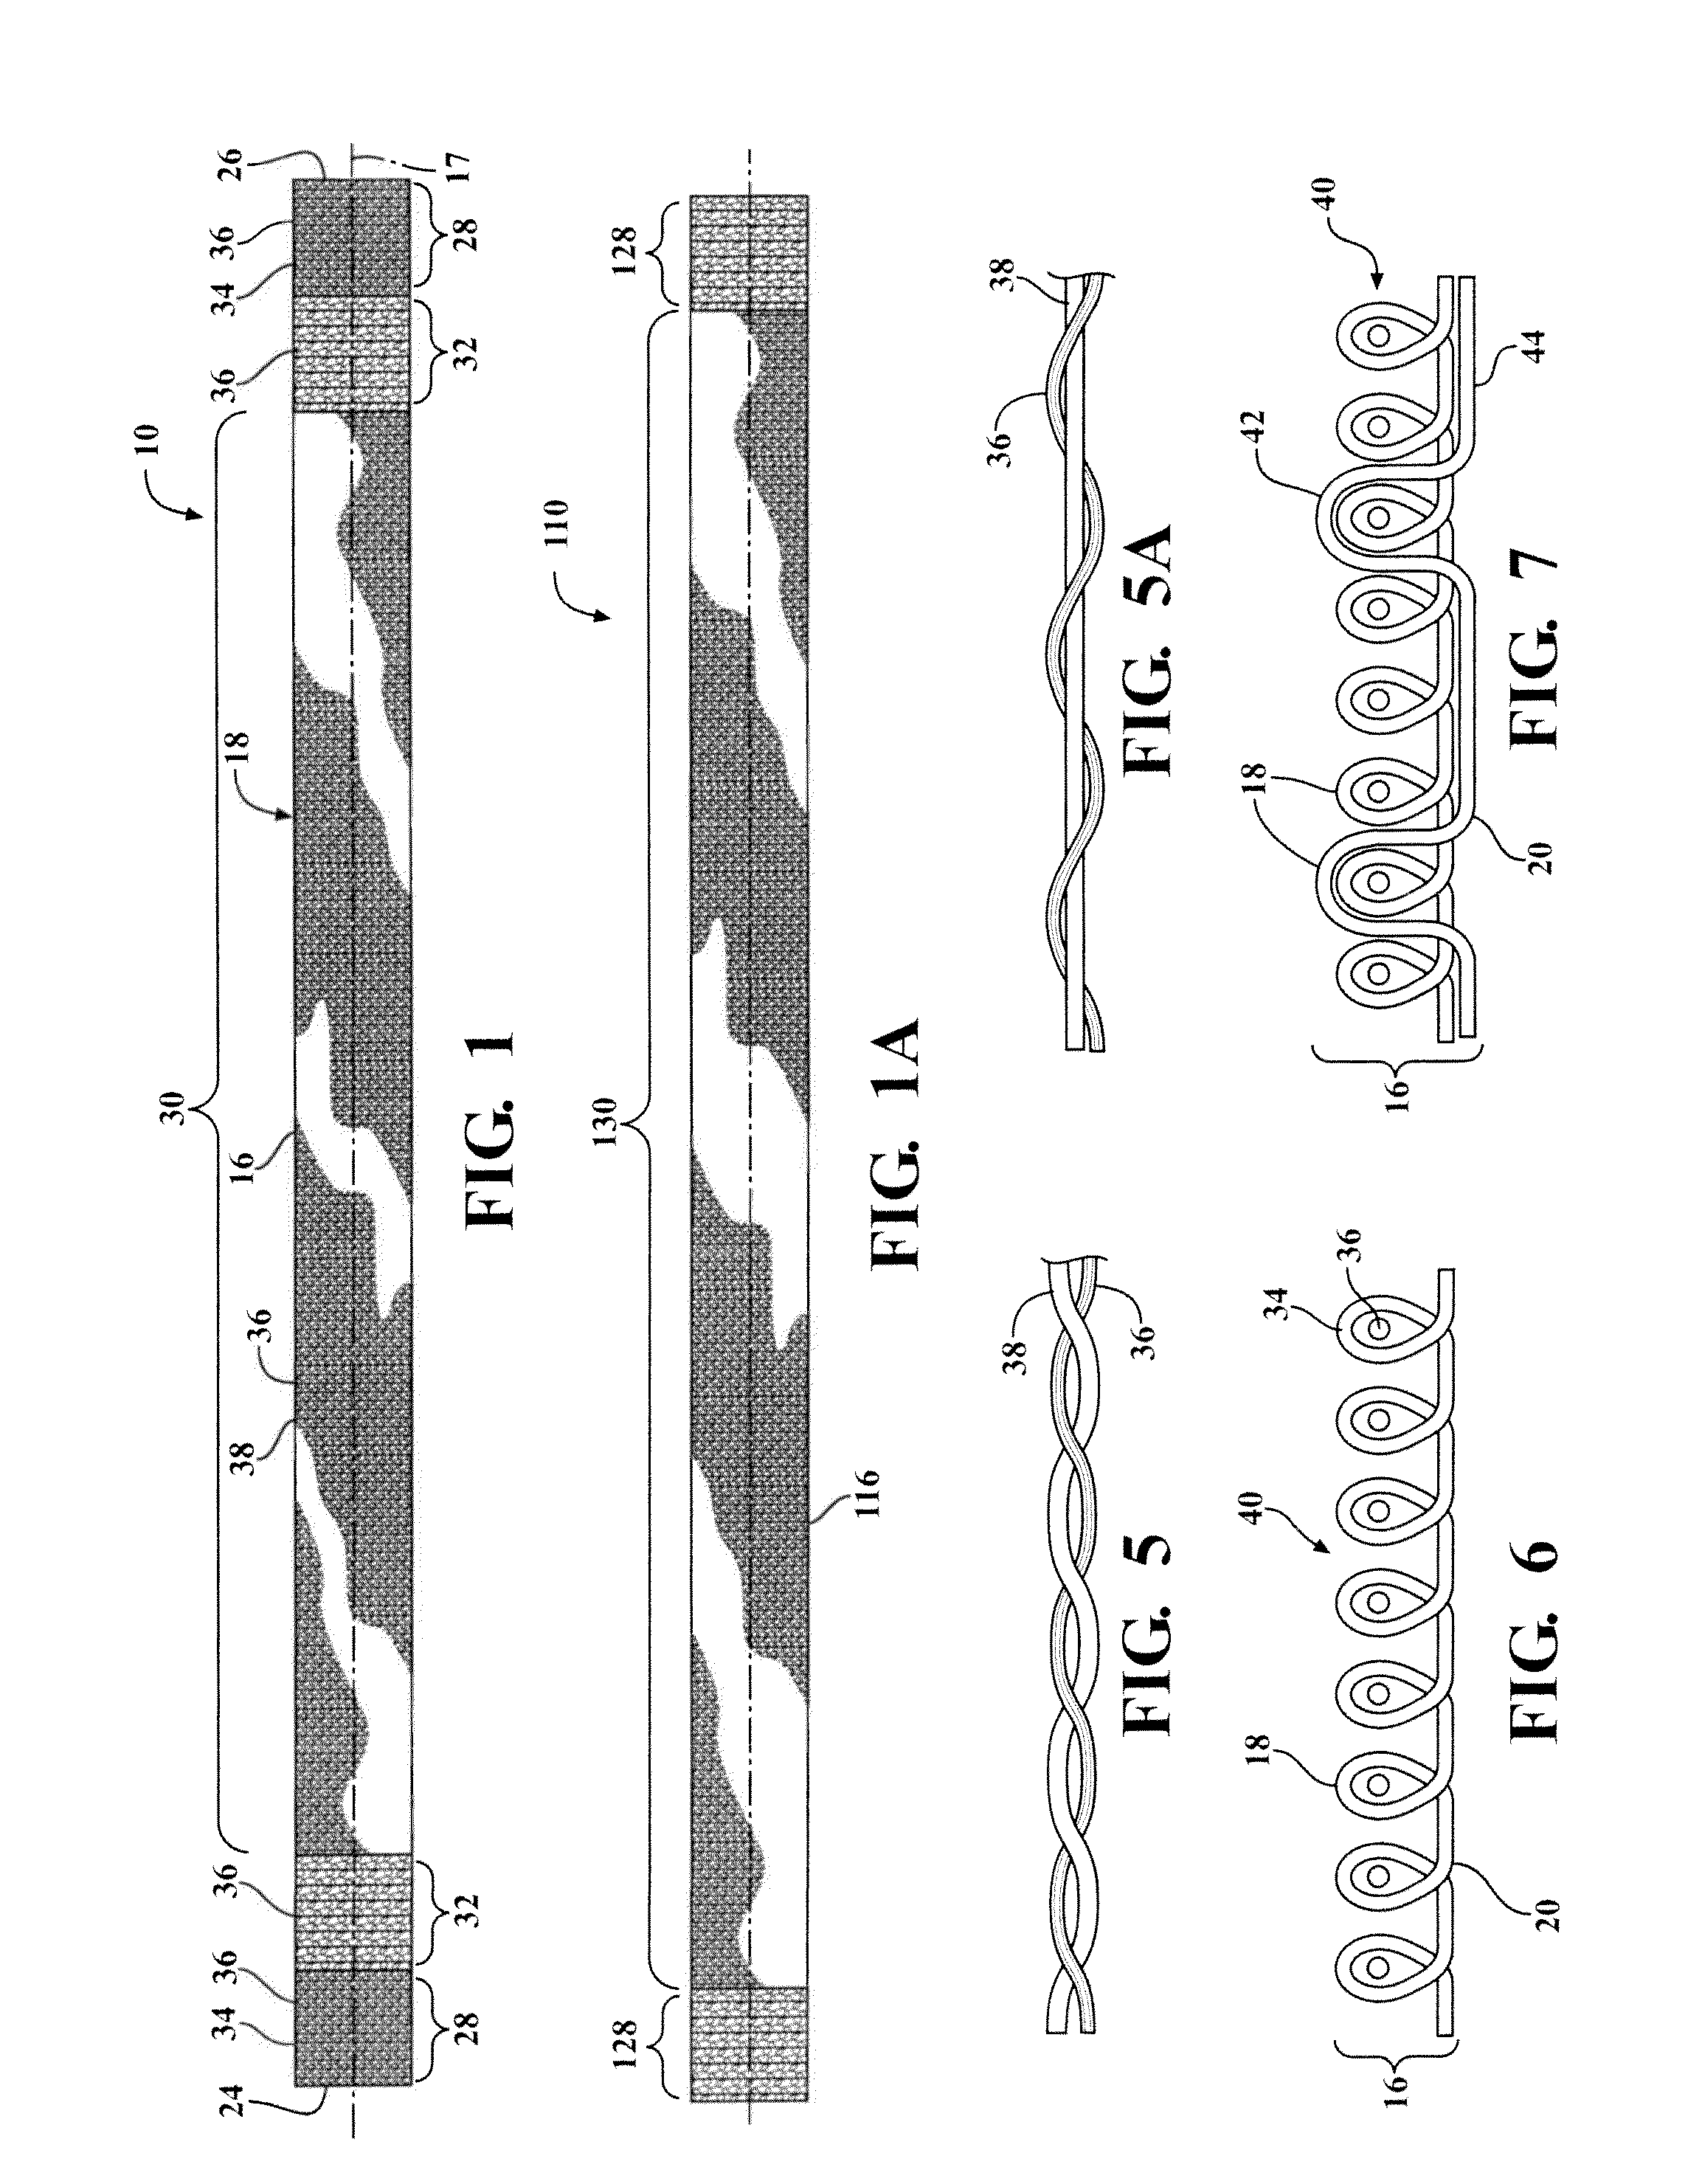 Knit sleeve for an oil dip stick tube, combination thereof, method of construction thereof and method of dampening the vibration of an oil dip stick tube